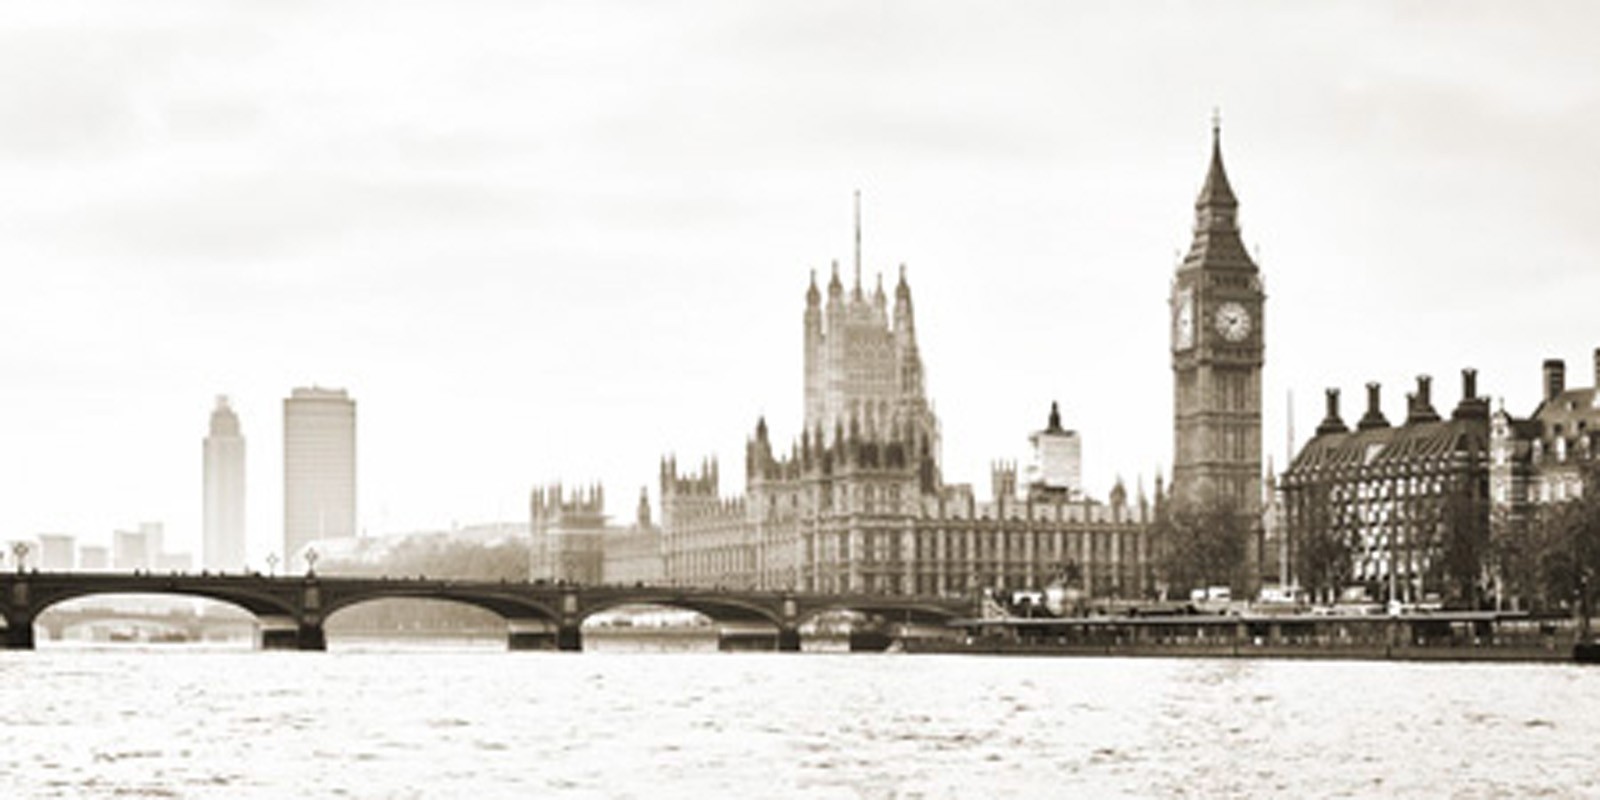 Anonymous - View of the Houses of Parliament and Westminster Bridge, London (detail)